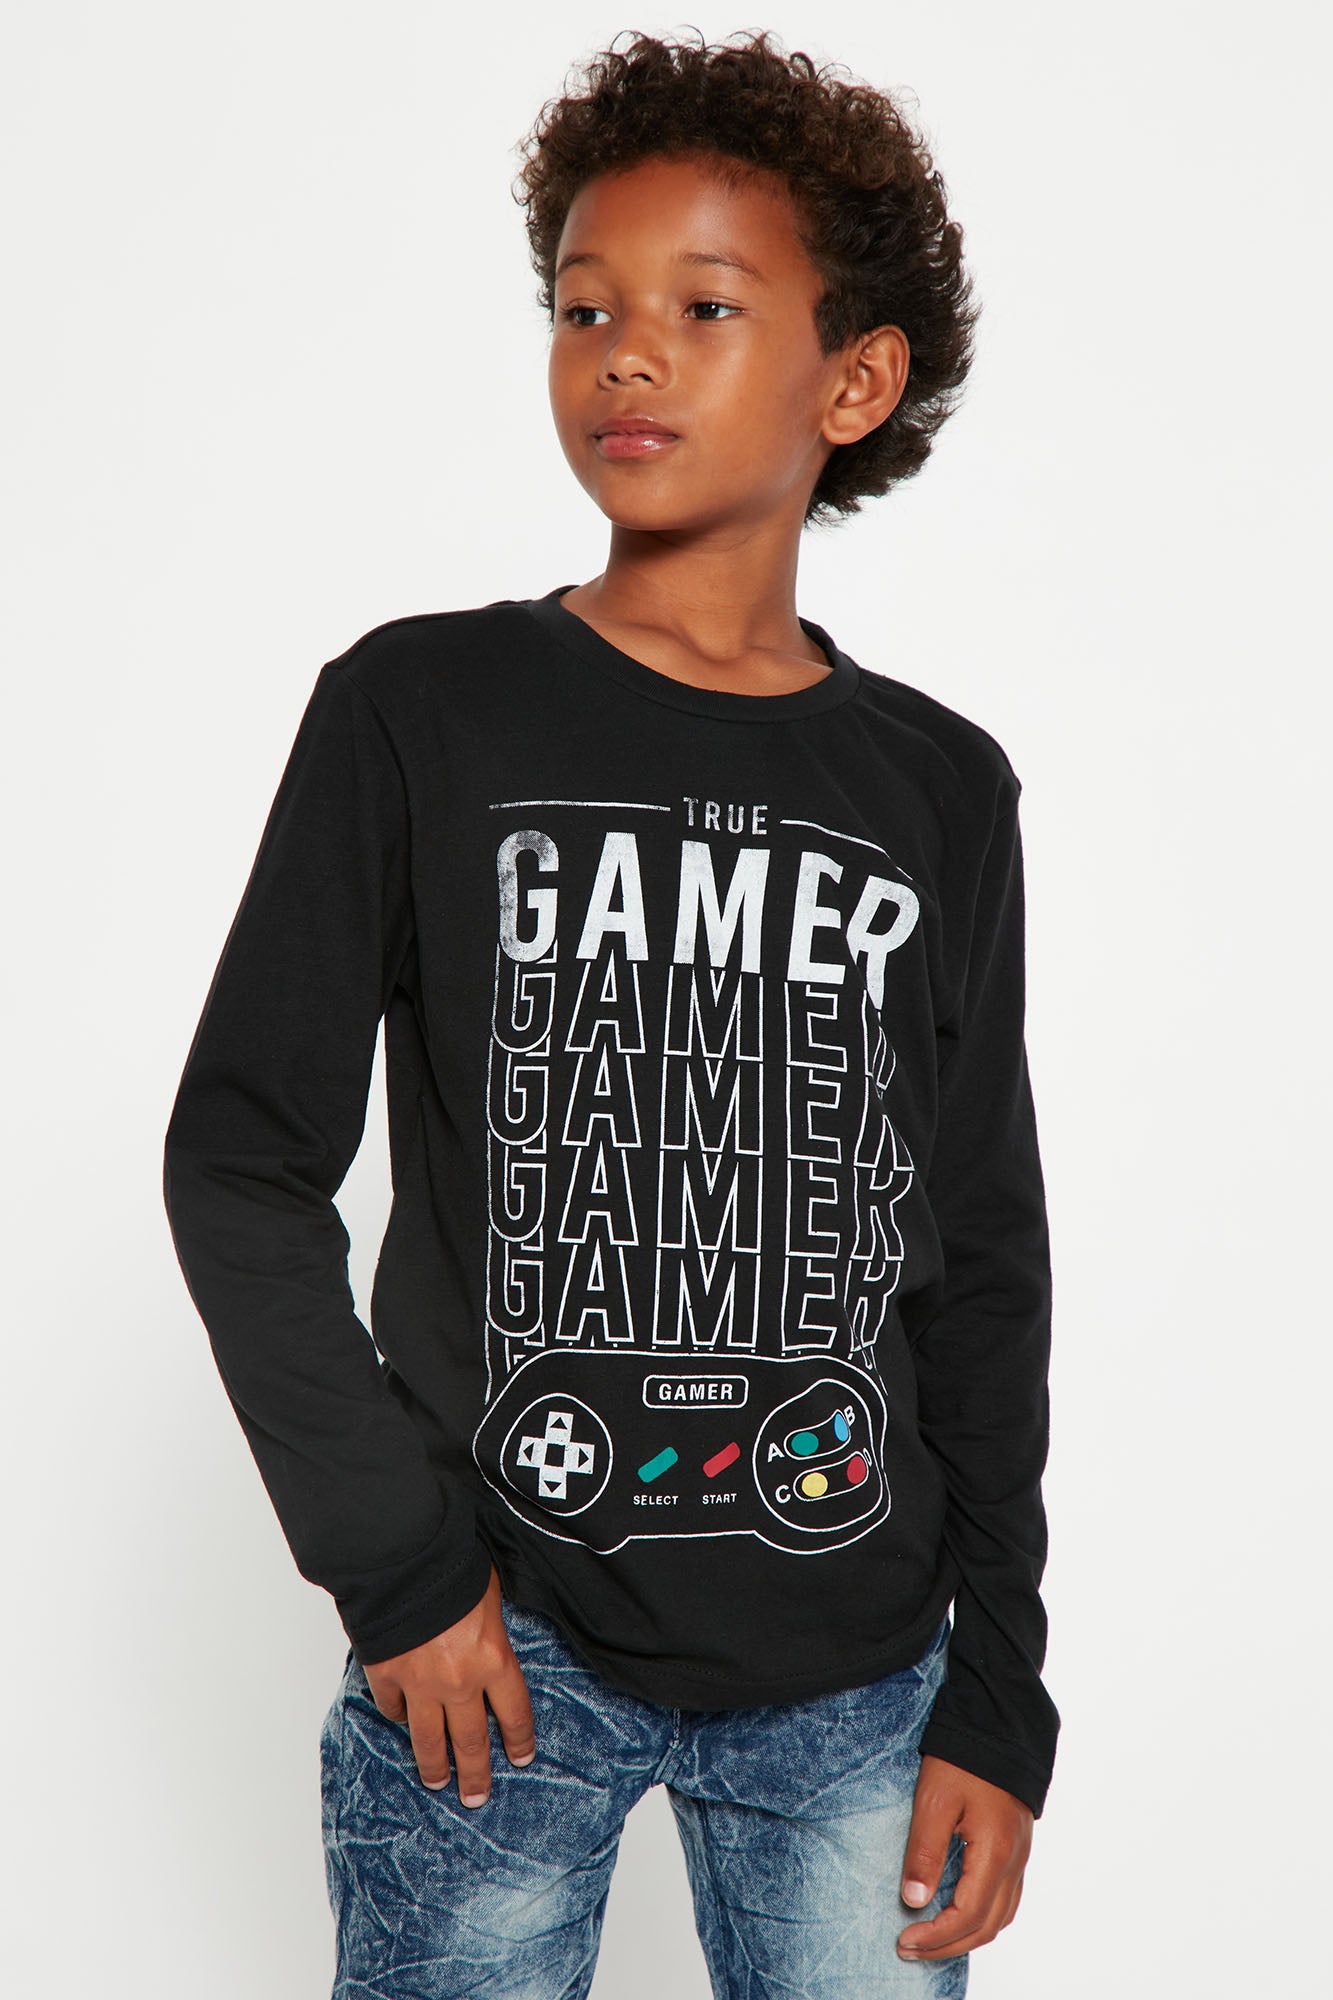 Game Winner Long Sleeve Tops & T-Shirts for Boys Sizes (4+)